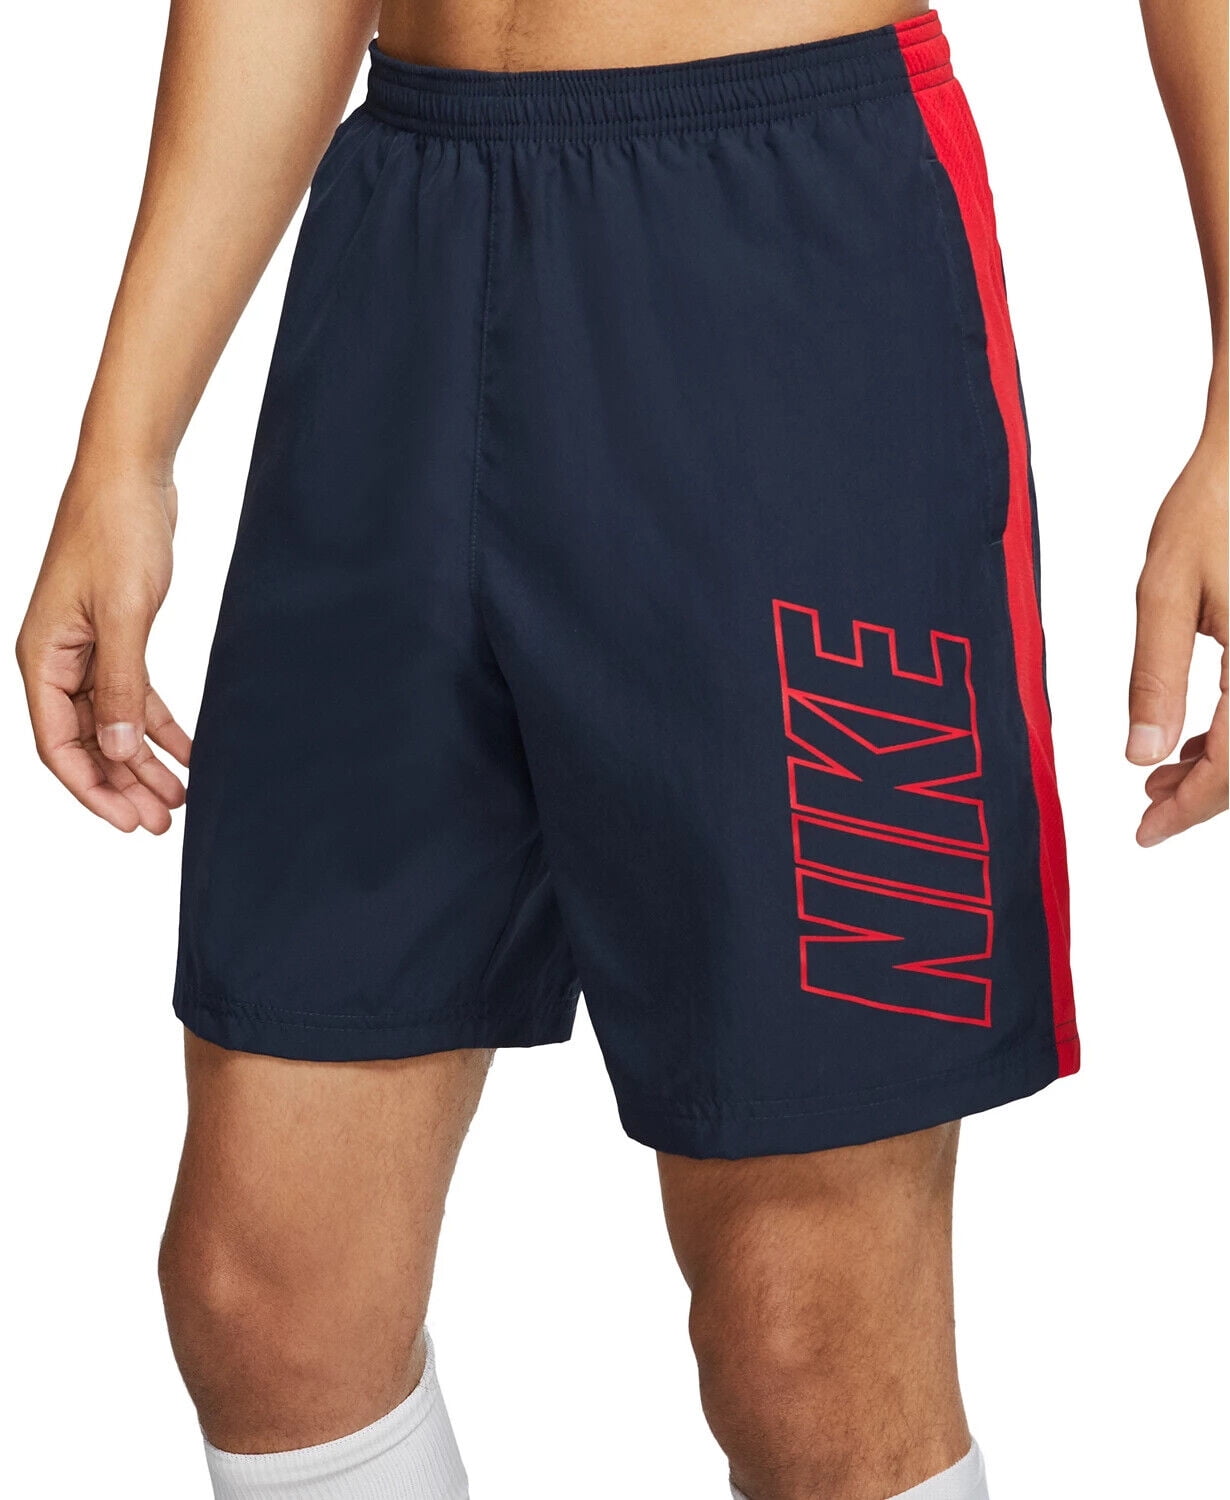 Nike Girls Performance Game Volleyball Shorts Dri Fit Youth Size X